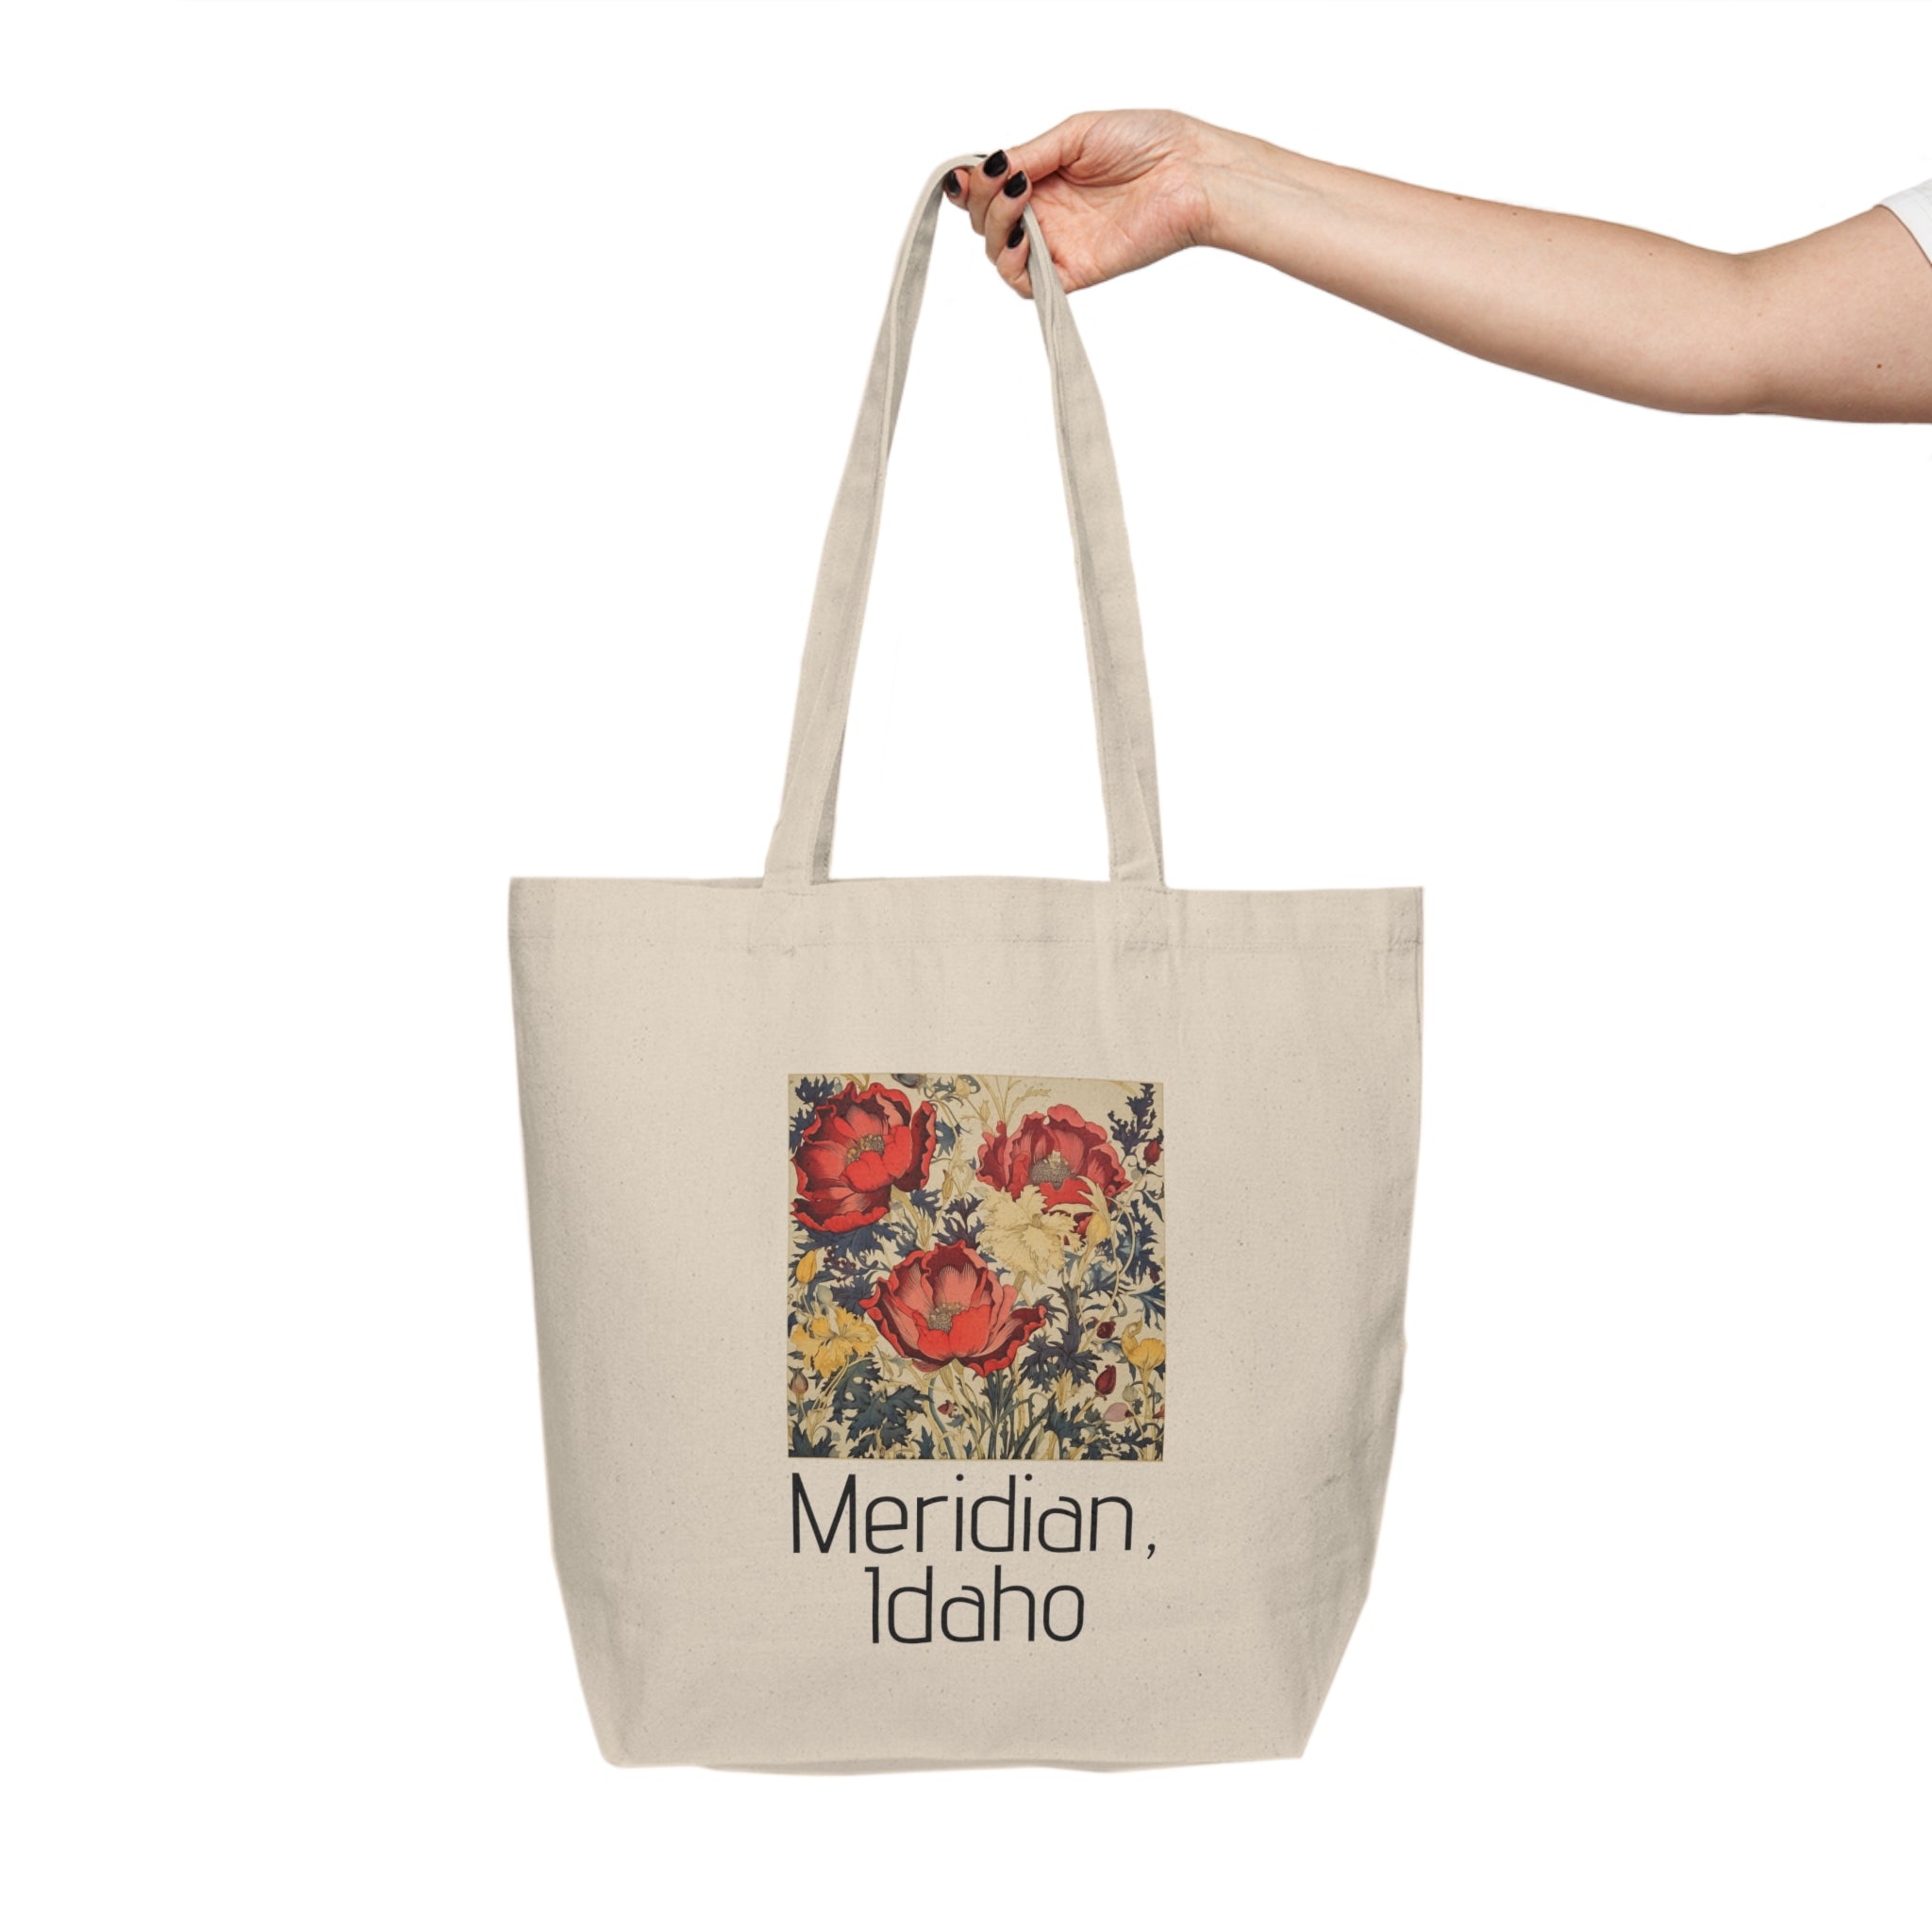 Meridian, Idaho (Customizable) - Canvas Shopping Tote - Spruced Roost